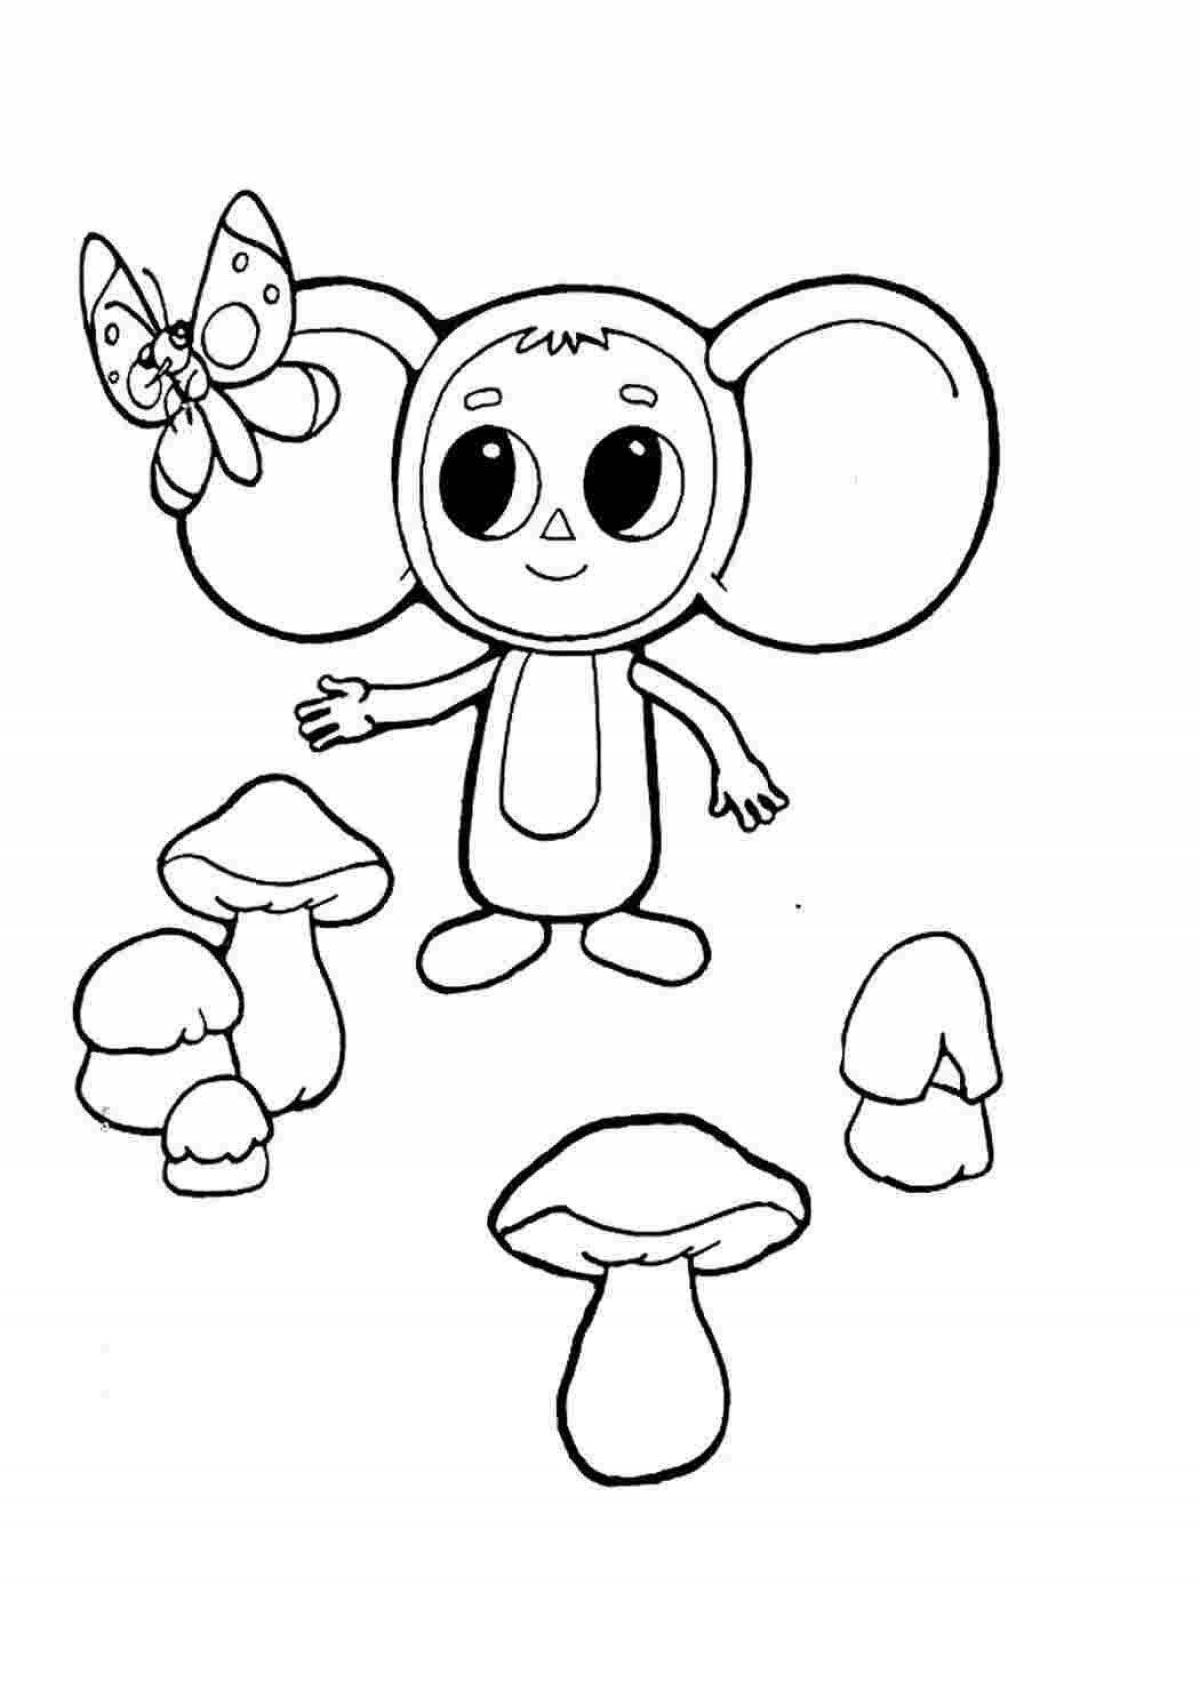 Colorful Cheburashka coloring book for children 6-7 years old